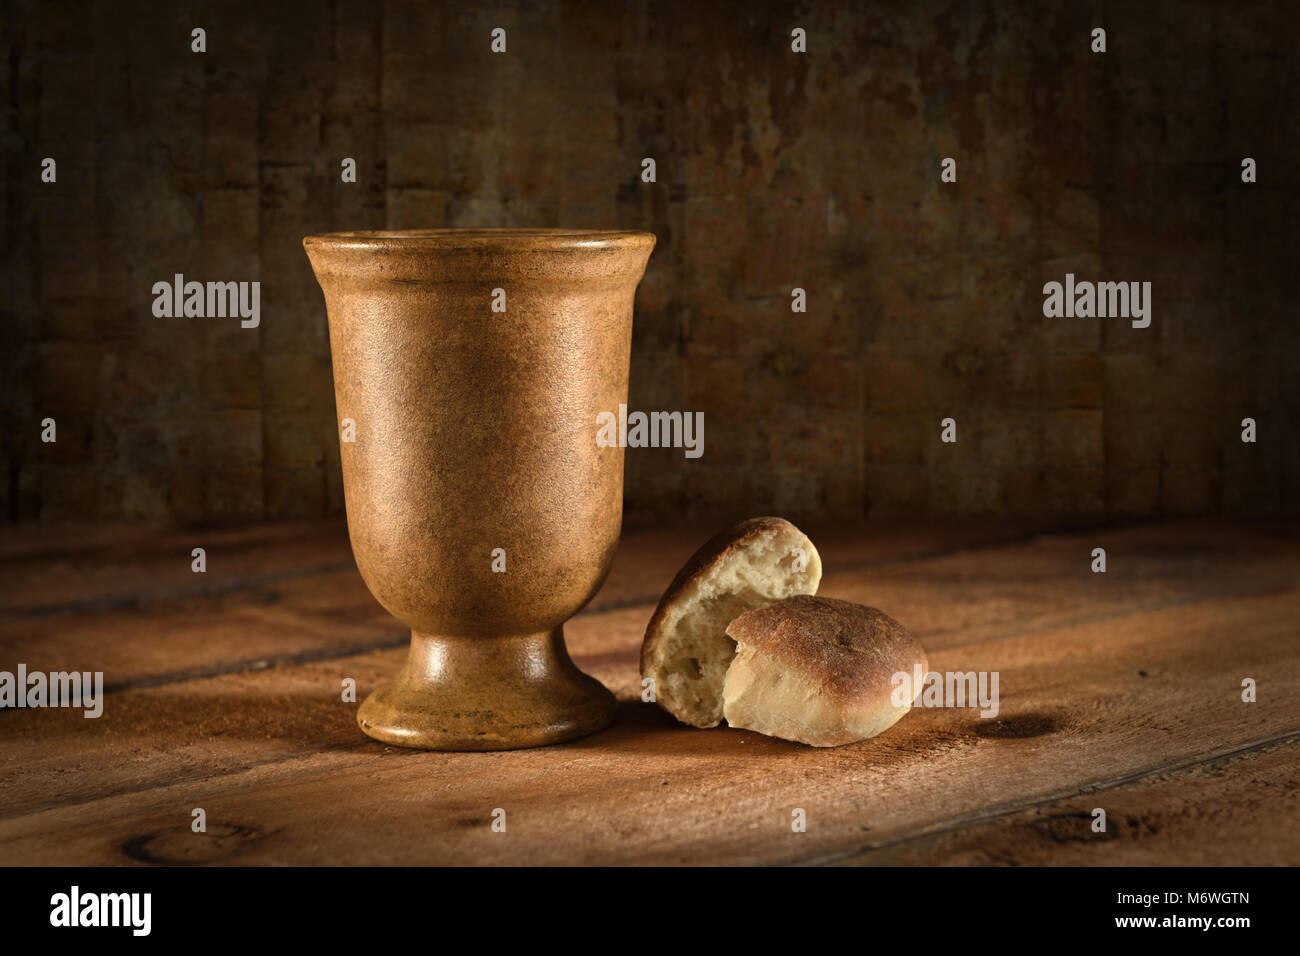 Wine goblet and bread as symbols of Communion on wooden table Stock Photo